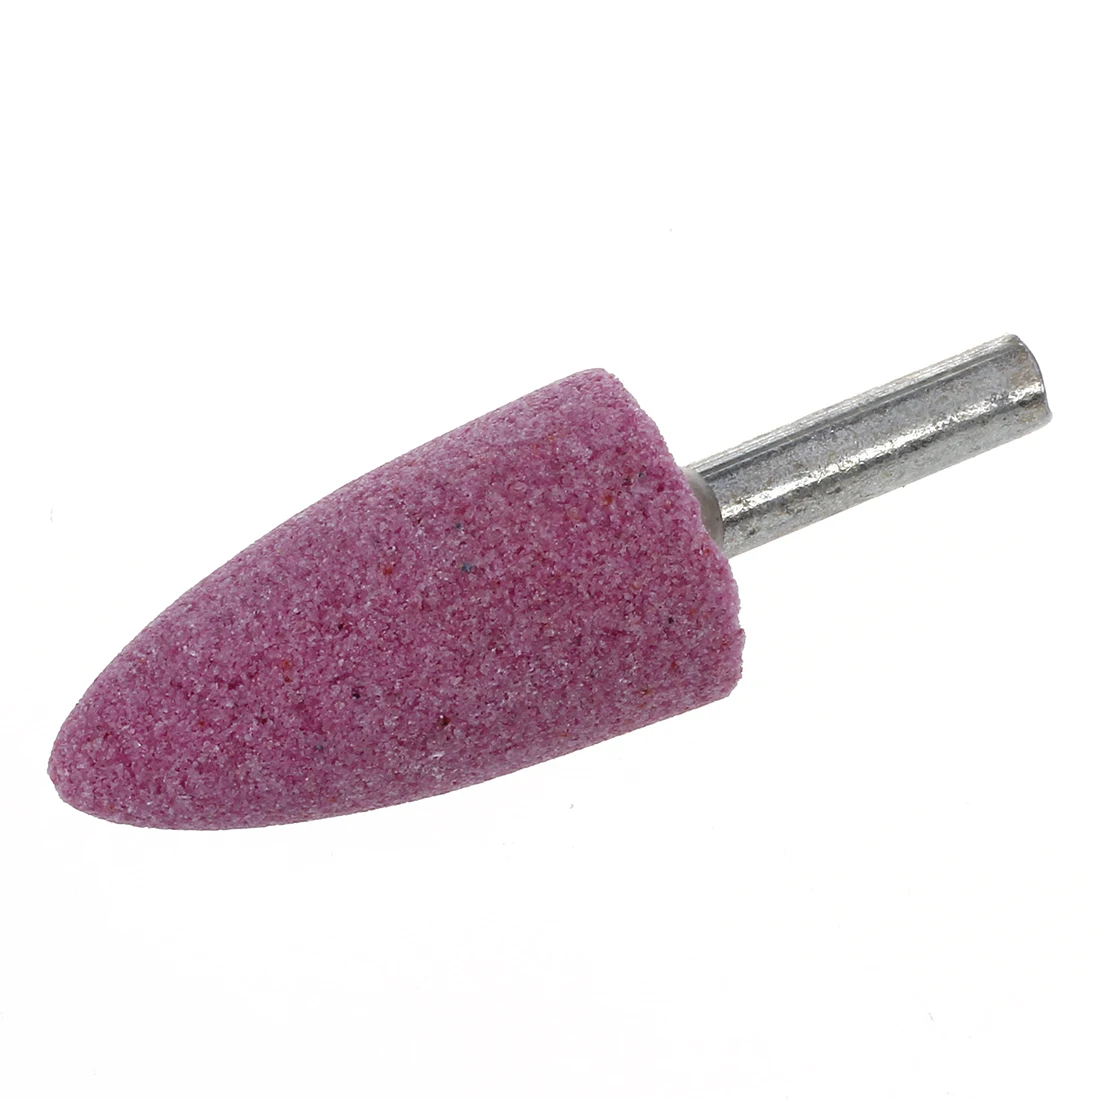 19mm Head Ceramic Stone Abrasive Grinding Mounted Points 2